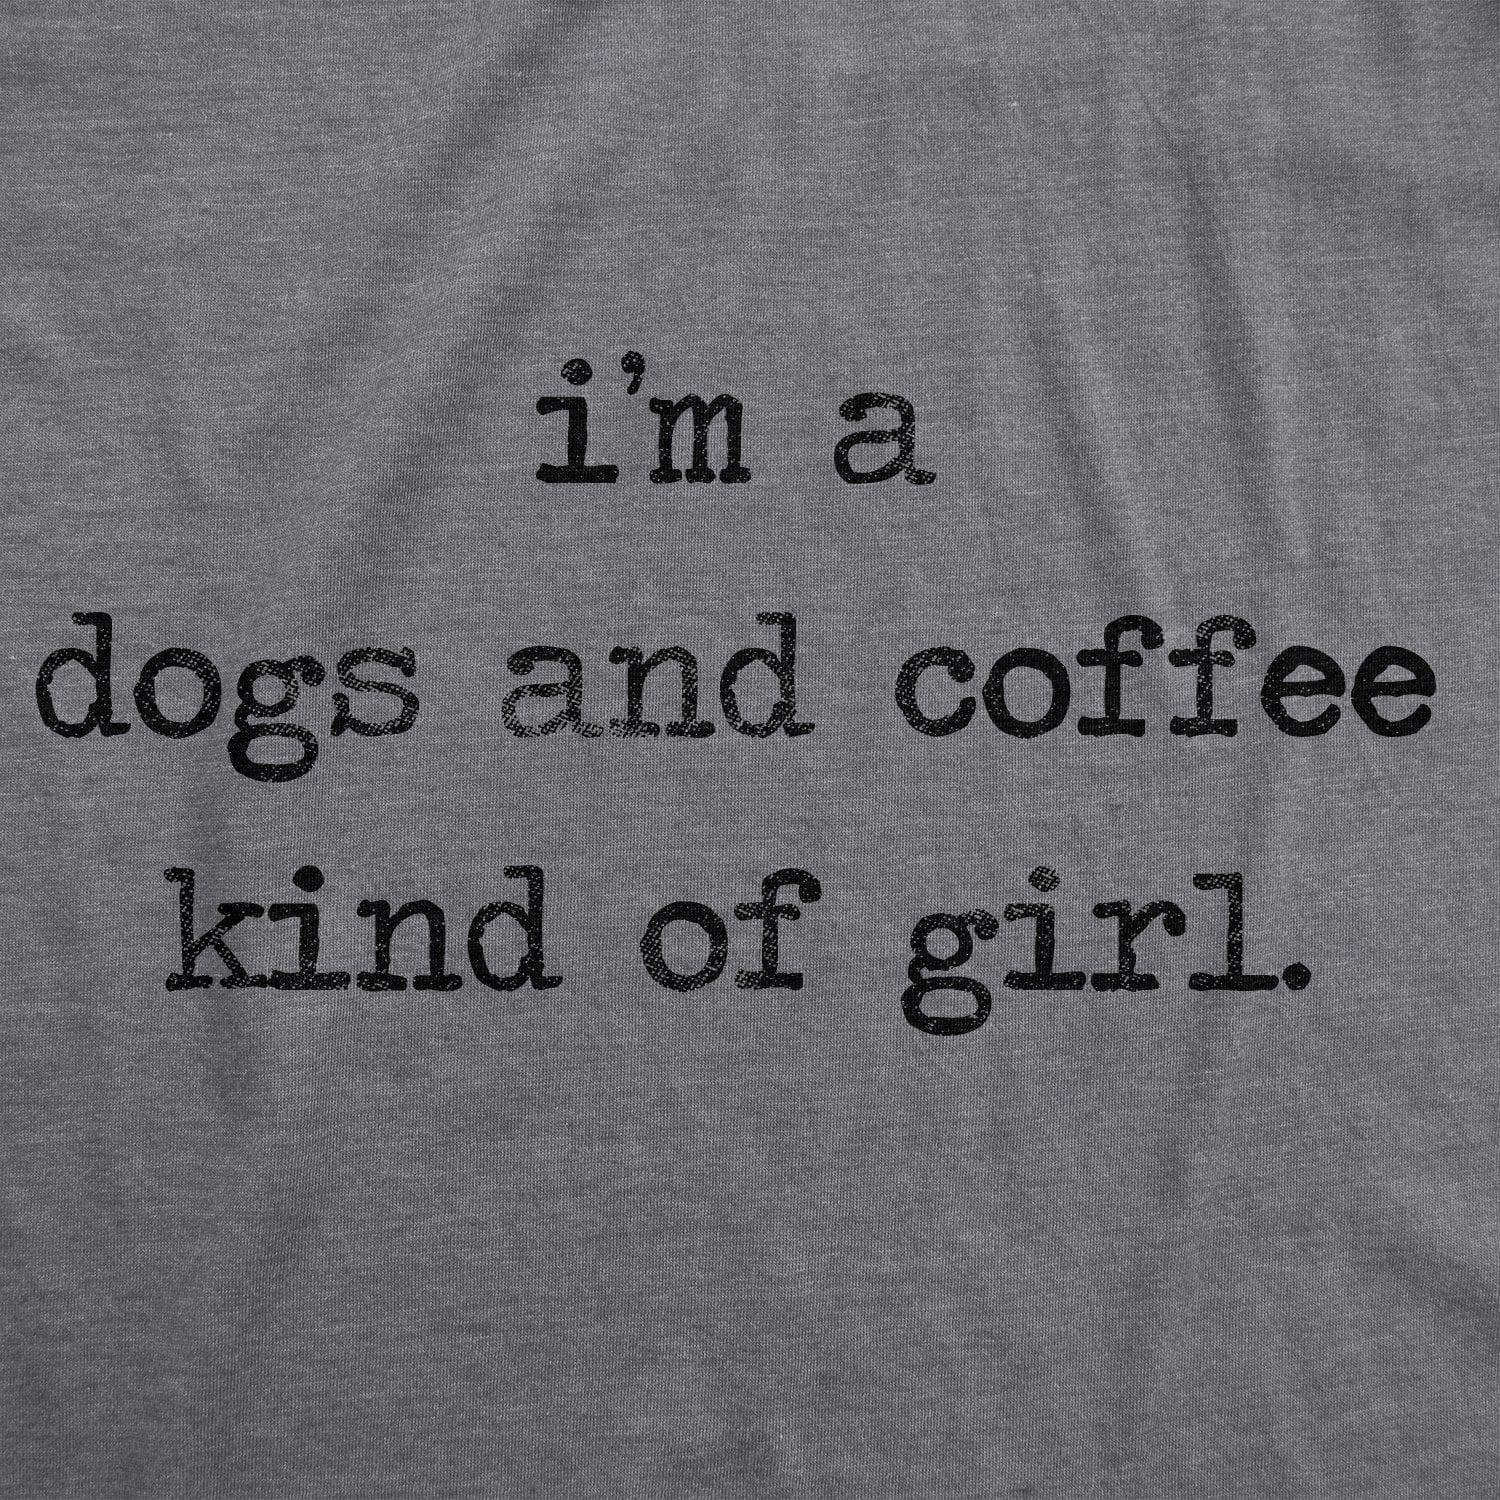 I'm A Dogs And Coffee Kind Of Girl Women's Tshirt  -  Crazy Dog T-Shirts